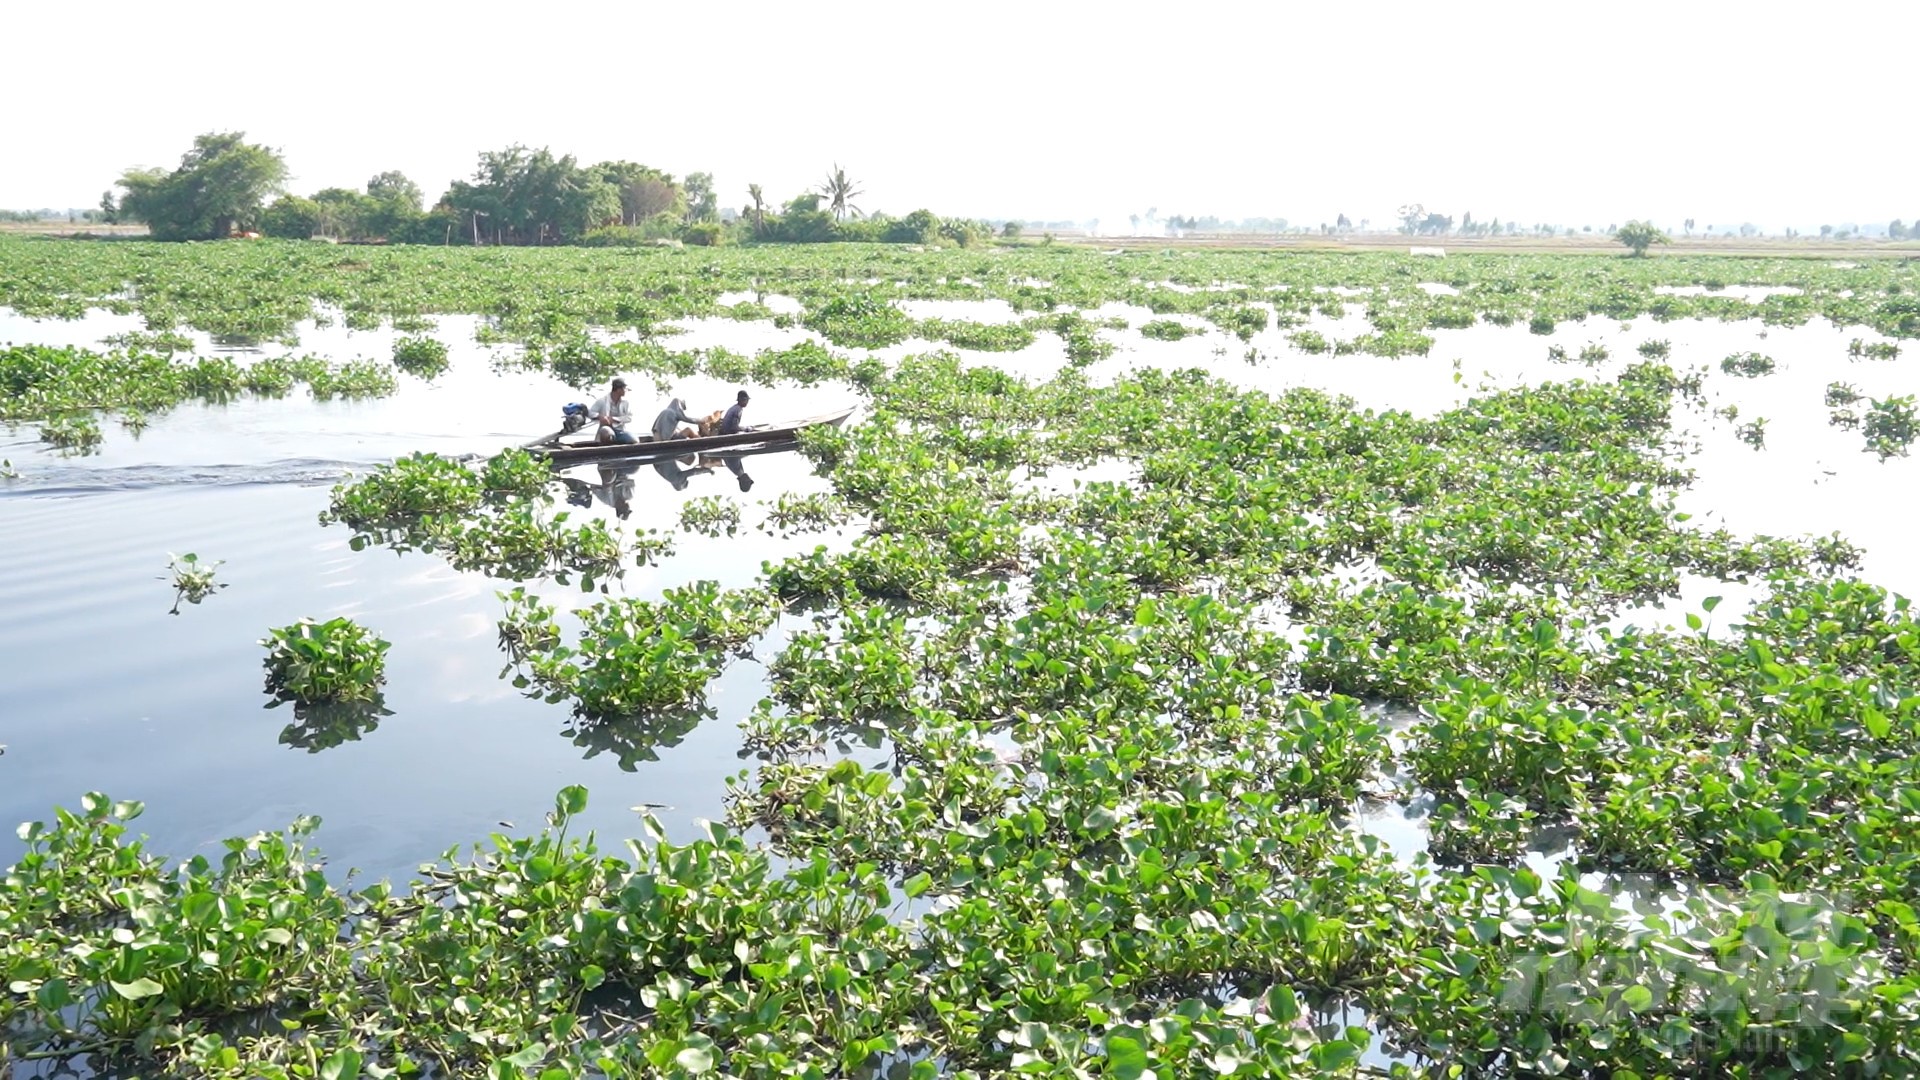 The method of growing aquatic organic vegetables is relatively suitable for Tay Ninh, which has many rivers and canals and an abundant source of water hyacinth. Photo: Le Binh.